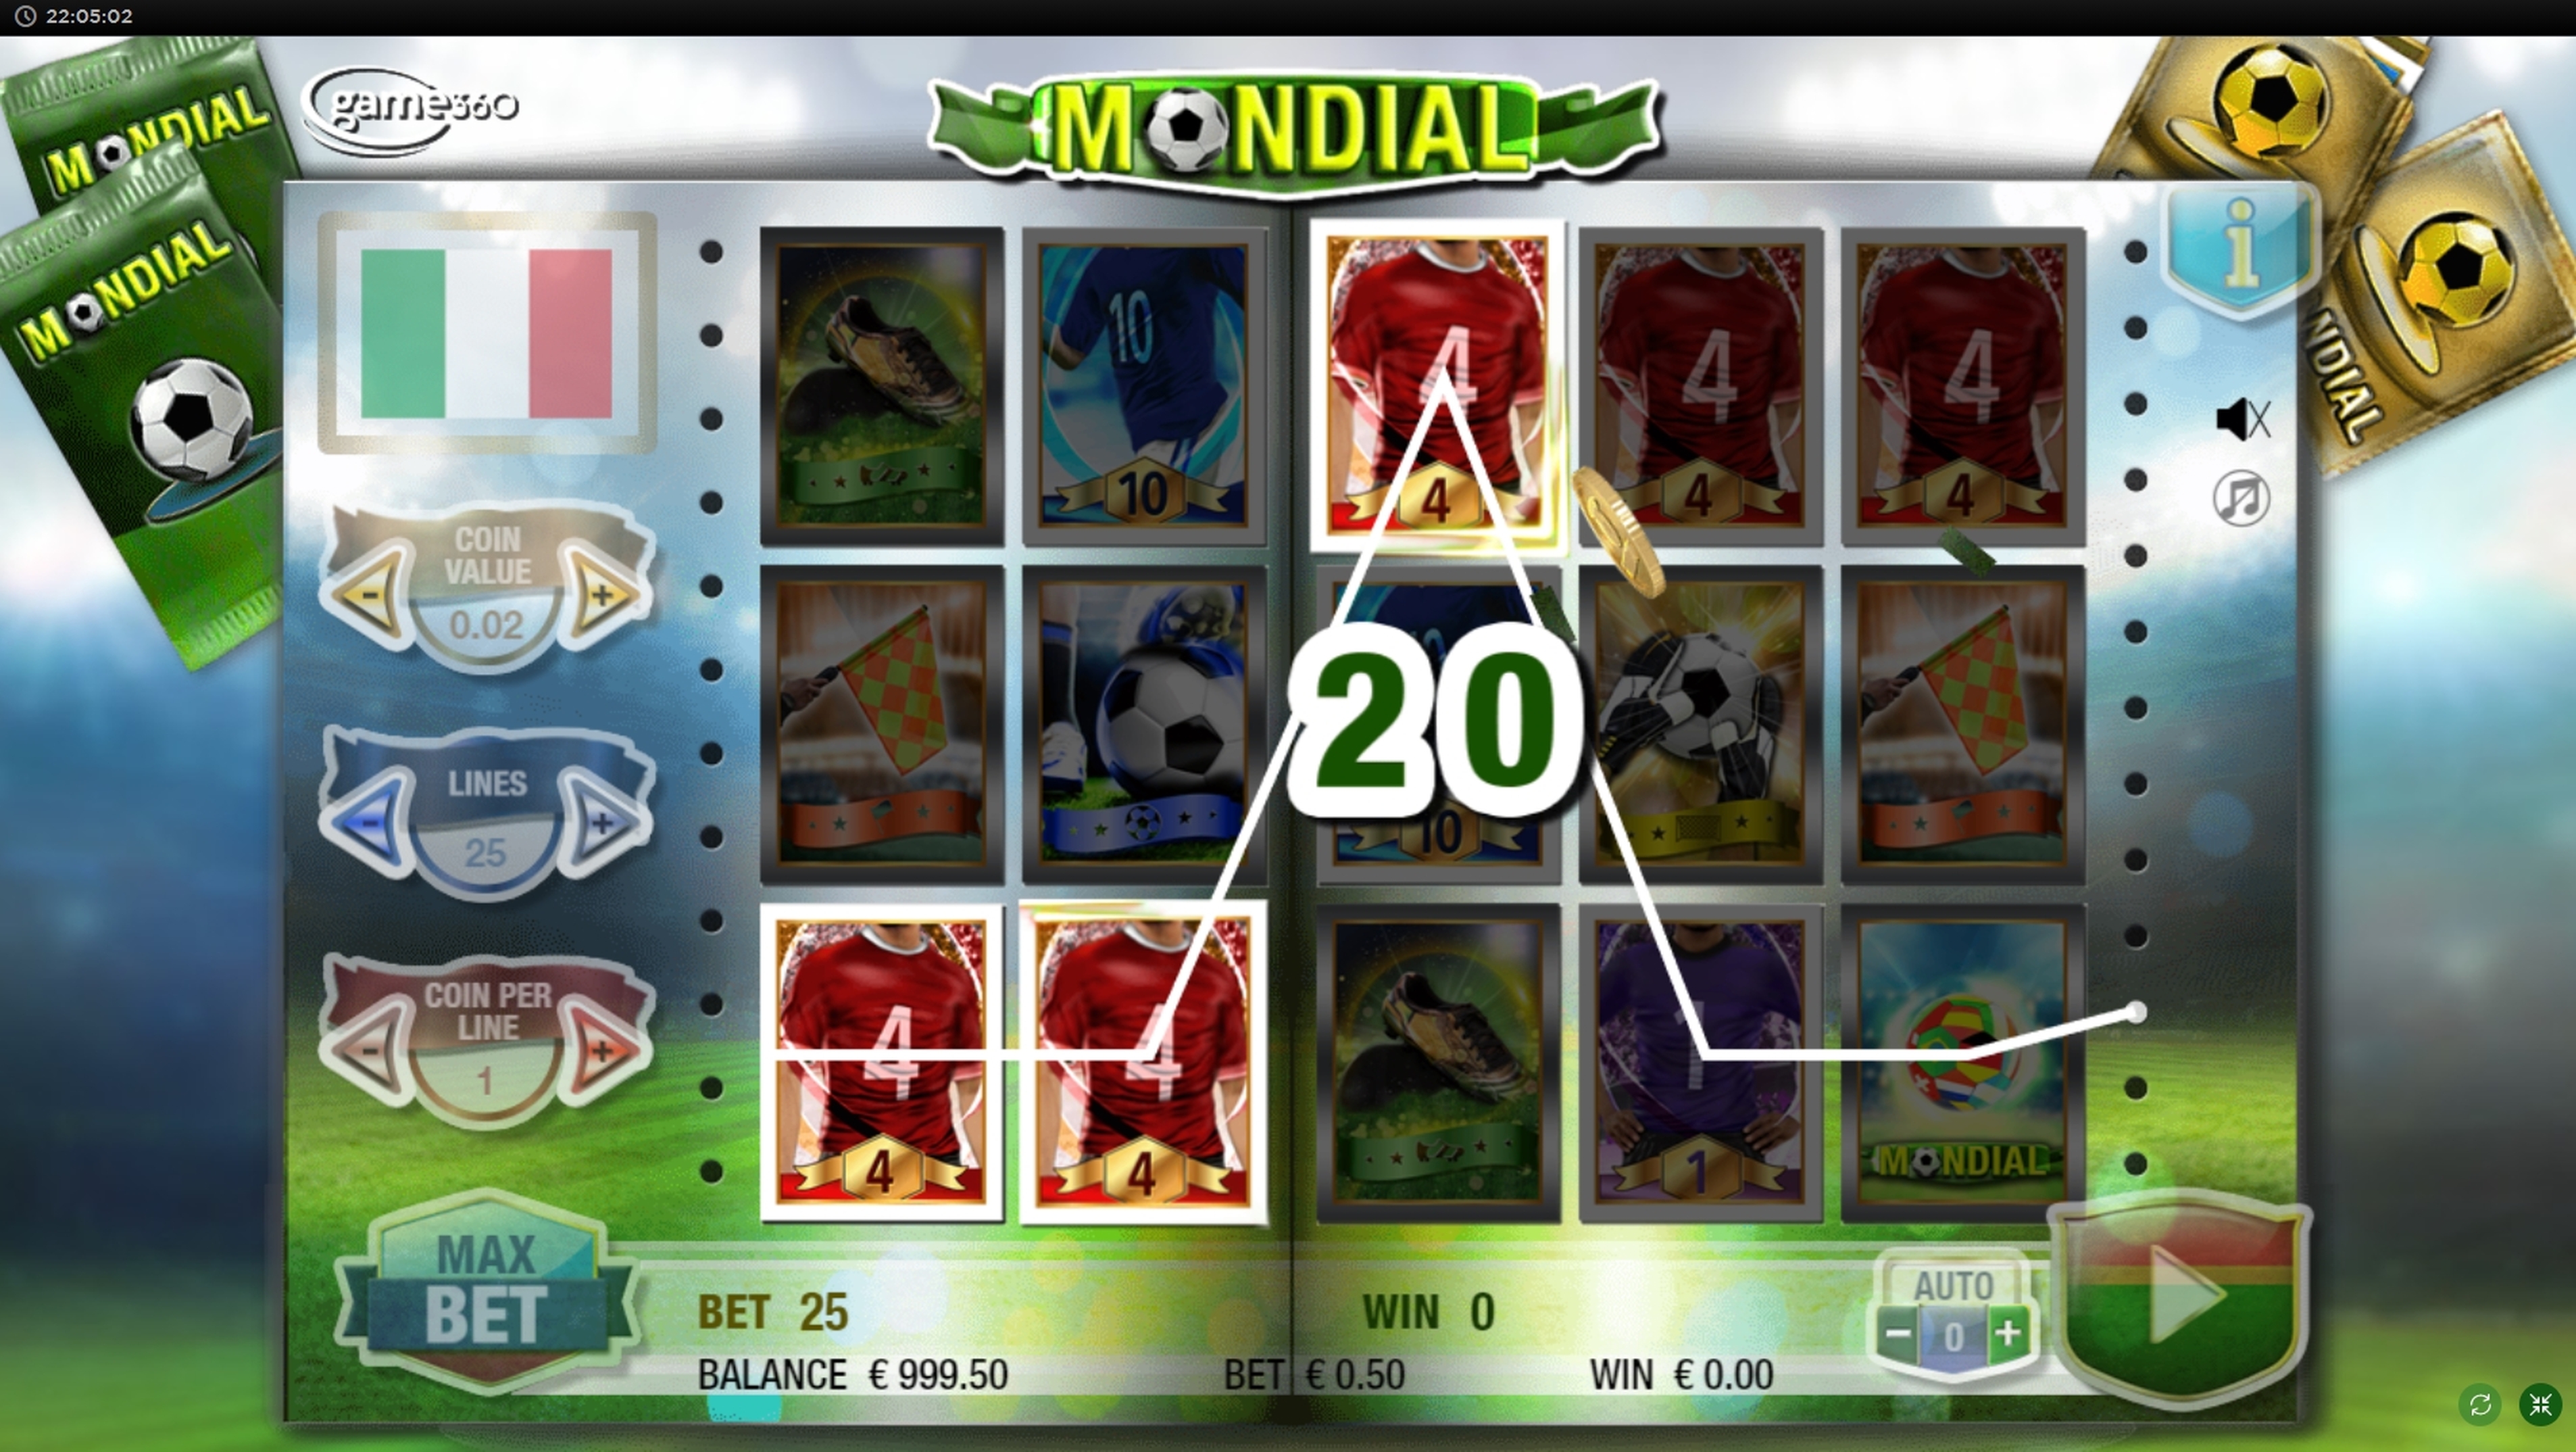 Win Money in Mondial Free Slot Game by Game360